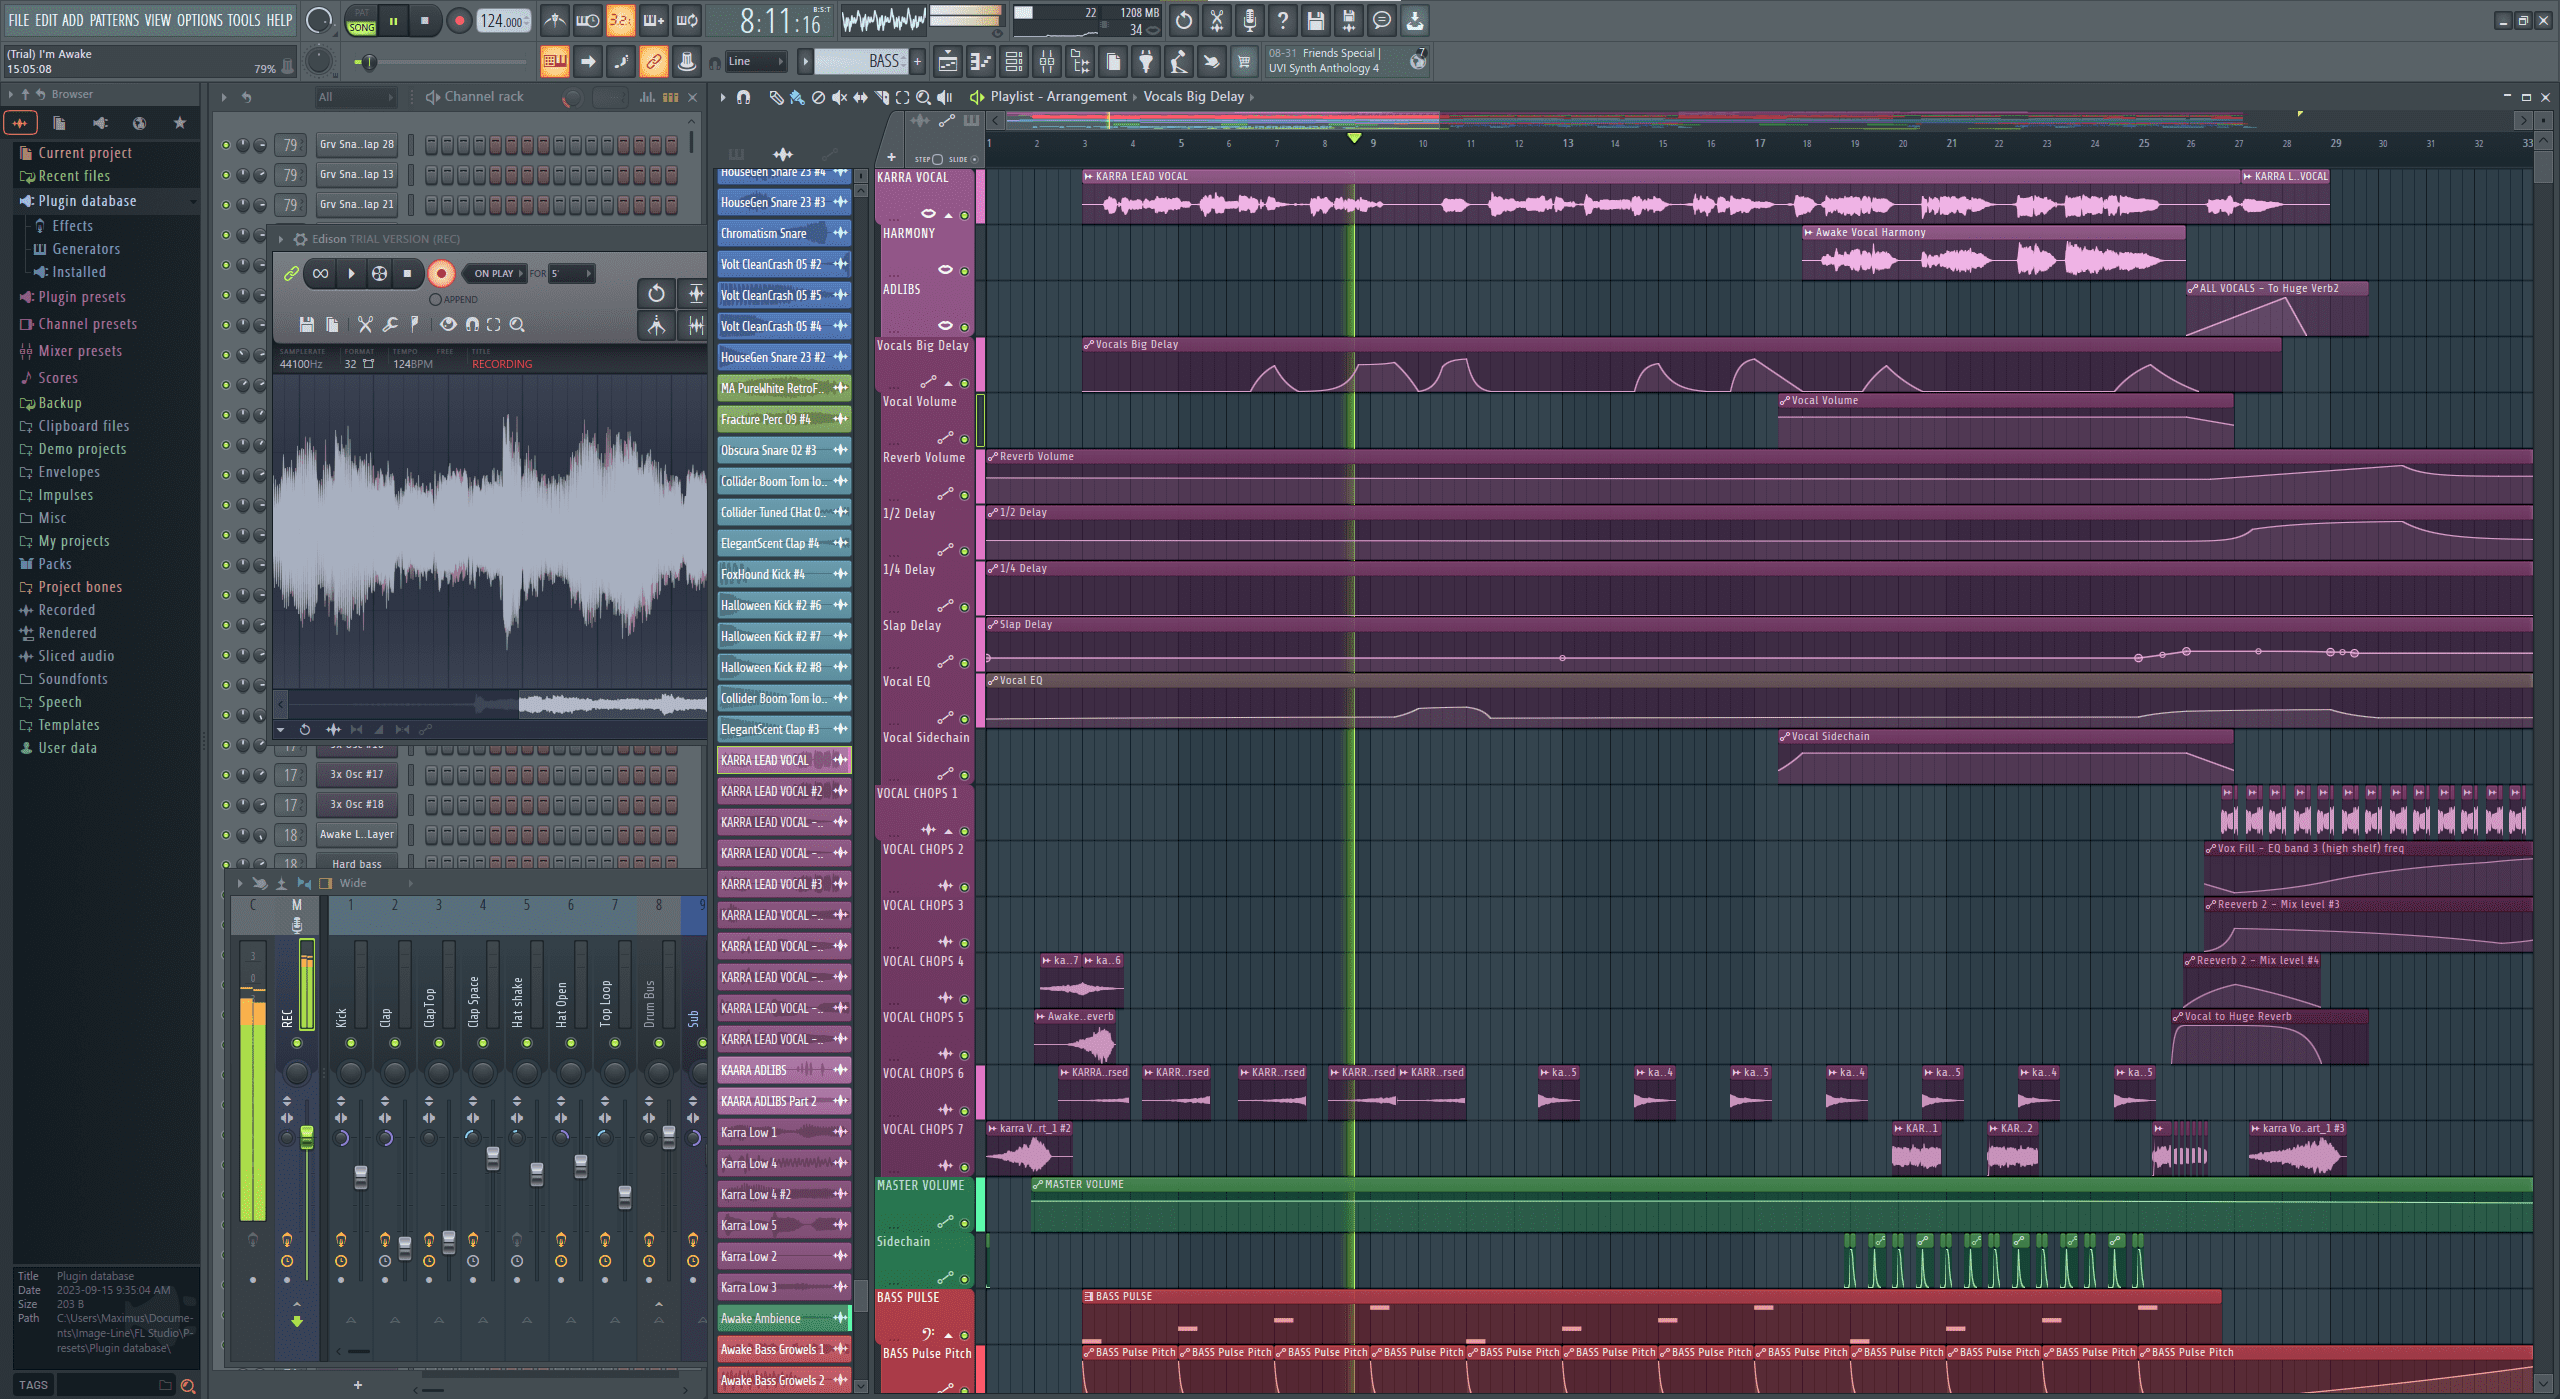 Using A 17 Year Old Version of FL Studio (Fruity Loops 2) 